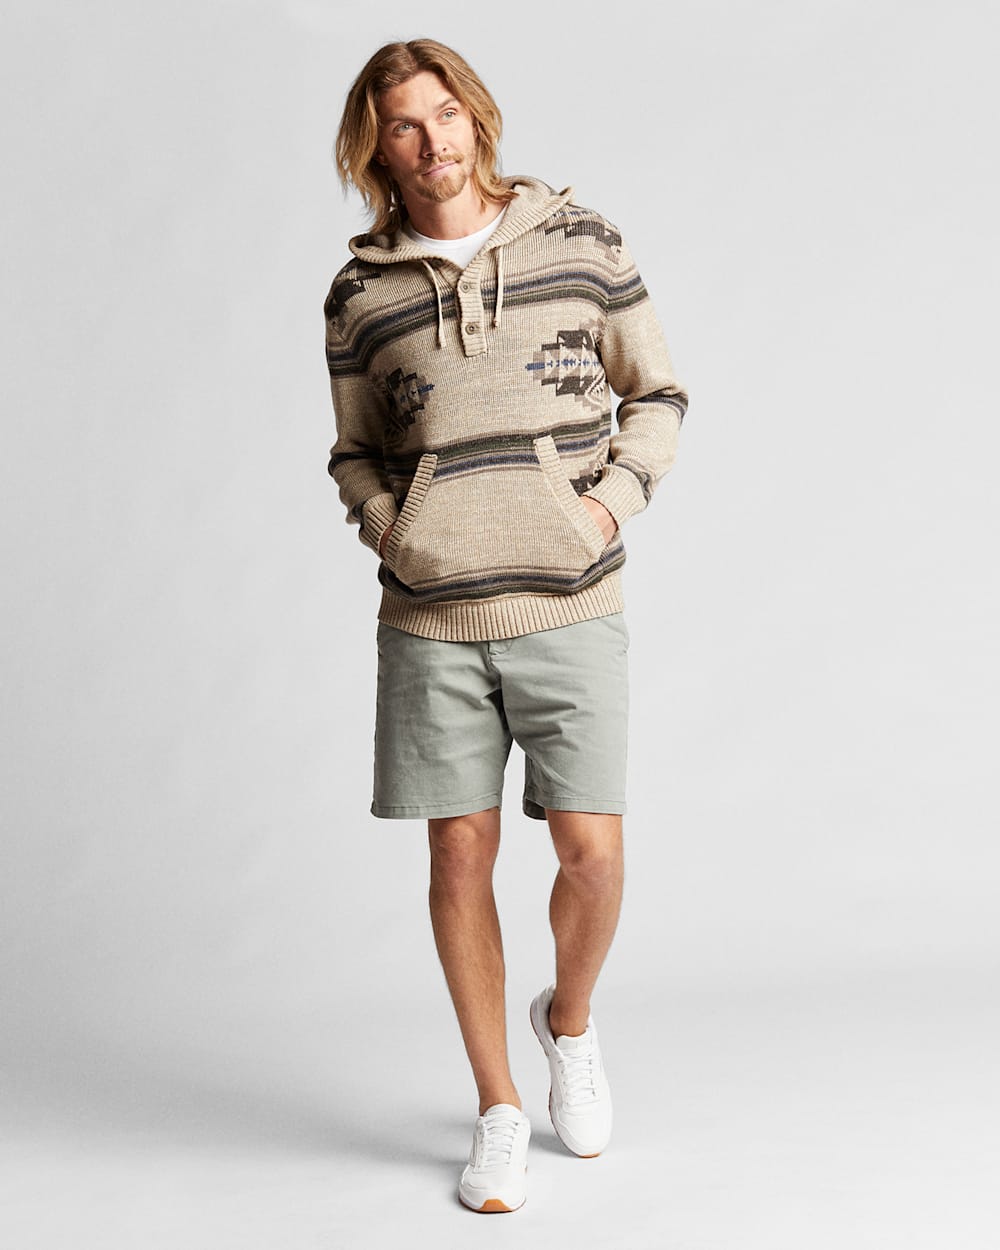 ALTERNATE VIEW OF MEN'S COTTON SWEATER HOODIE IN OATMEAL MIX image number 3